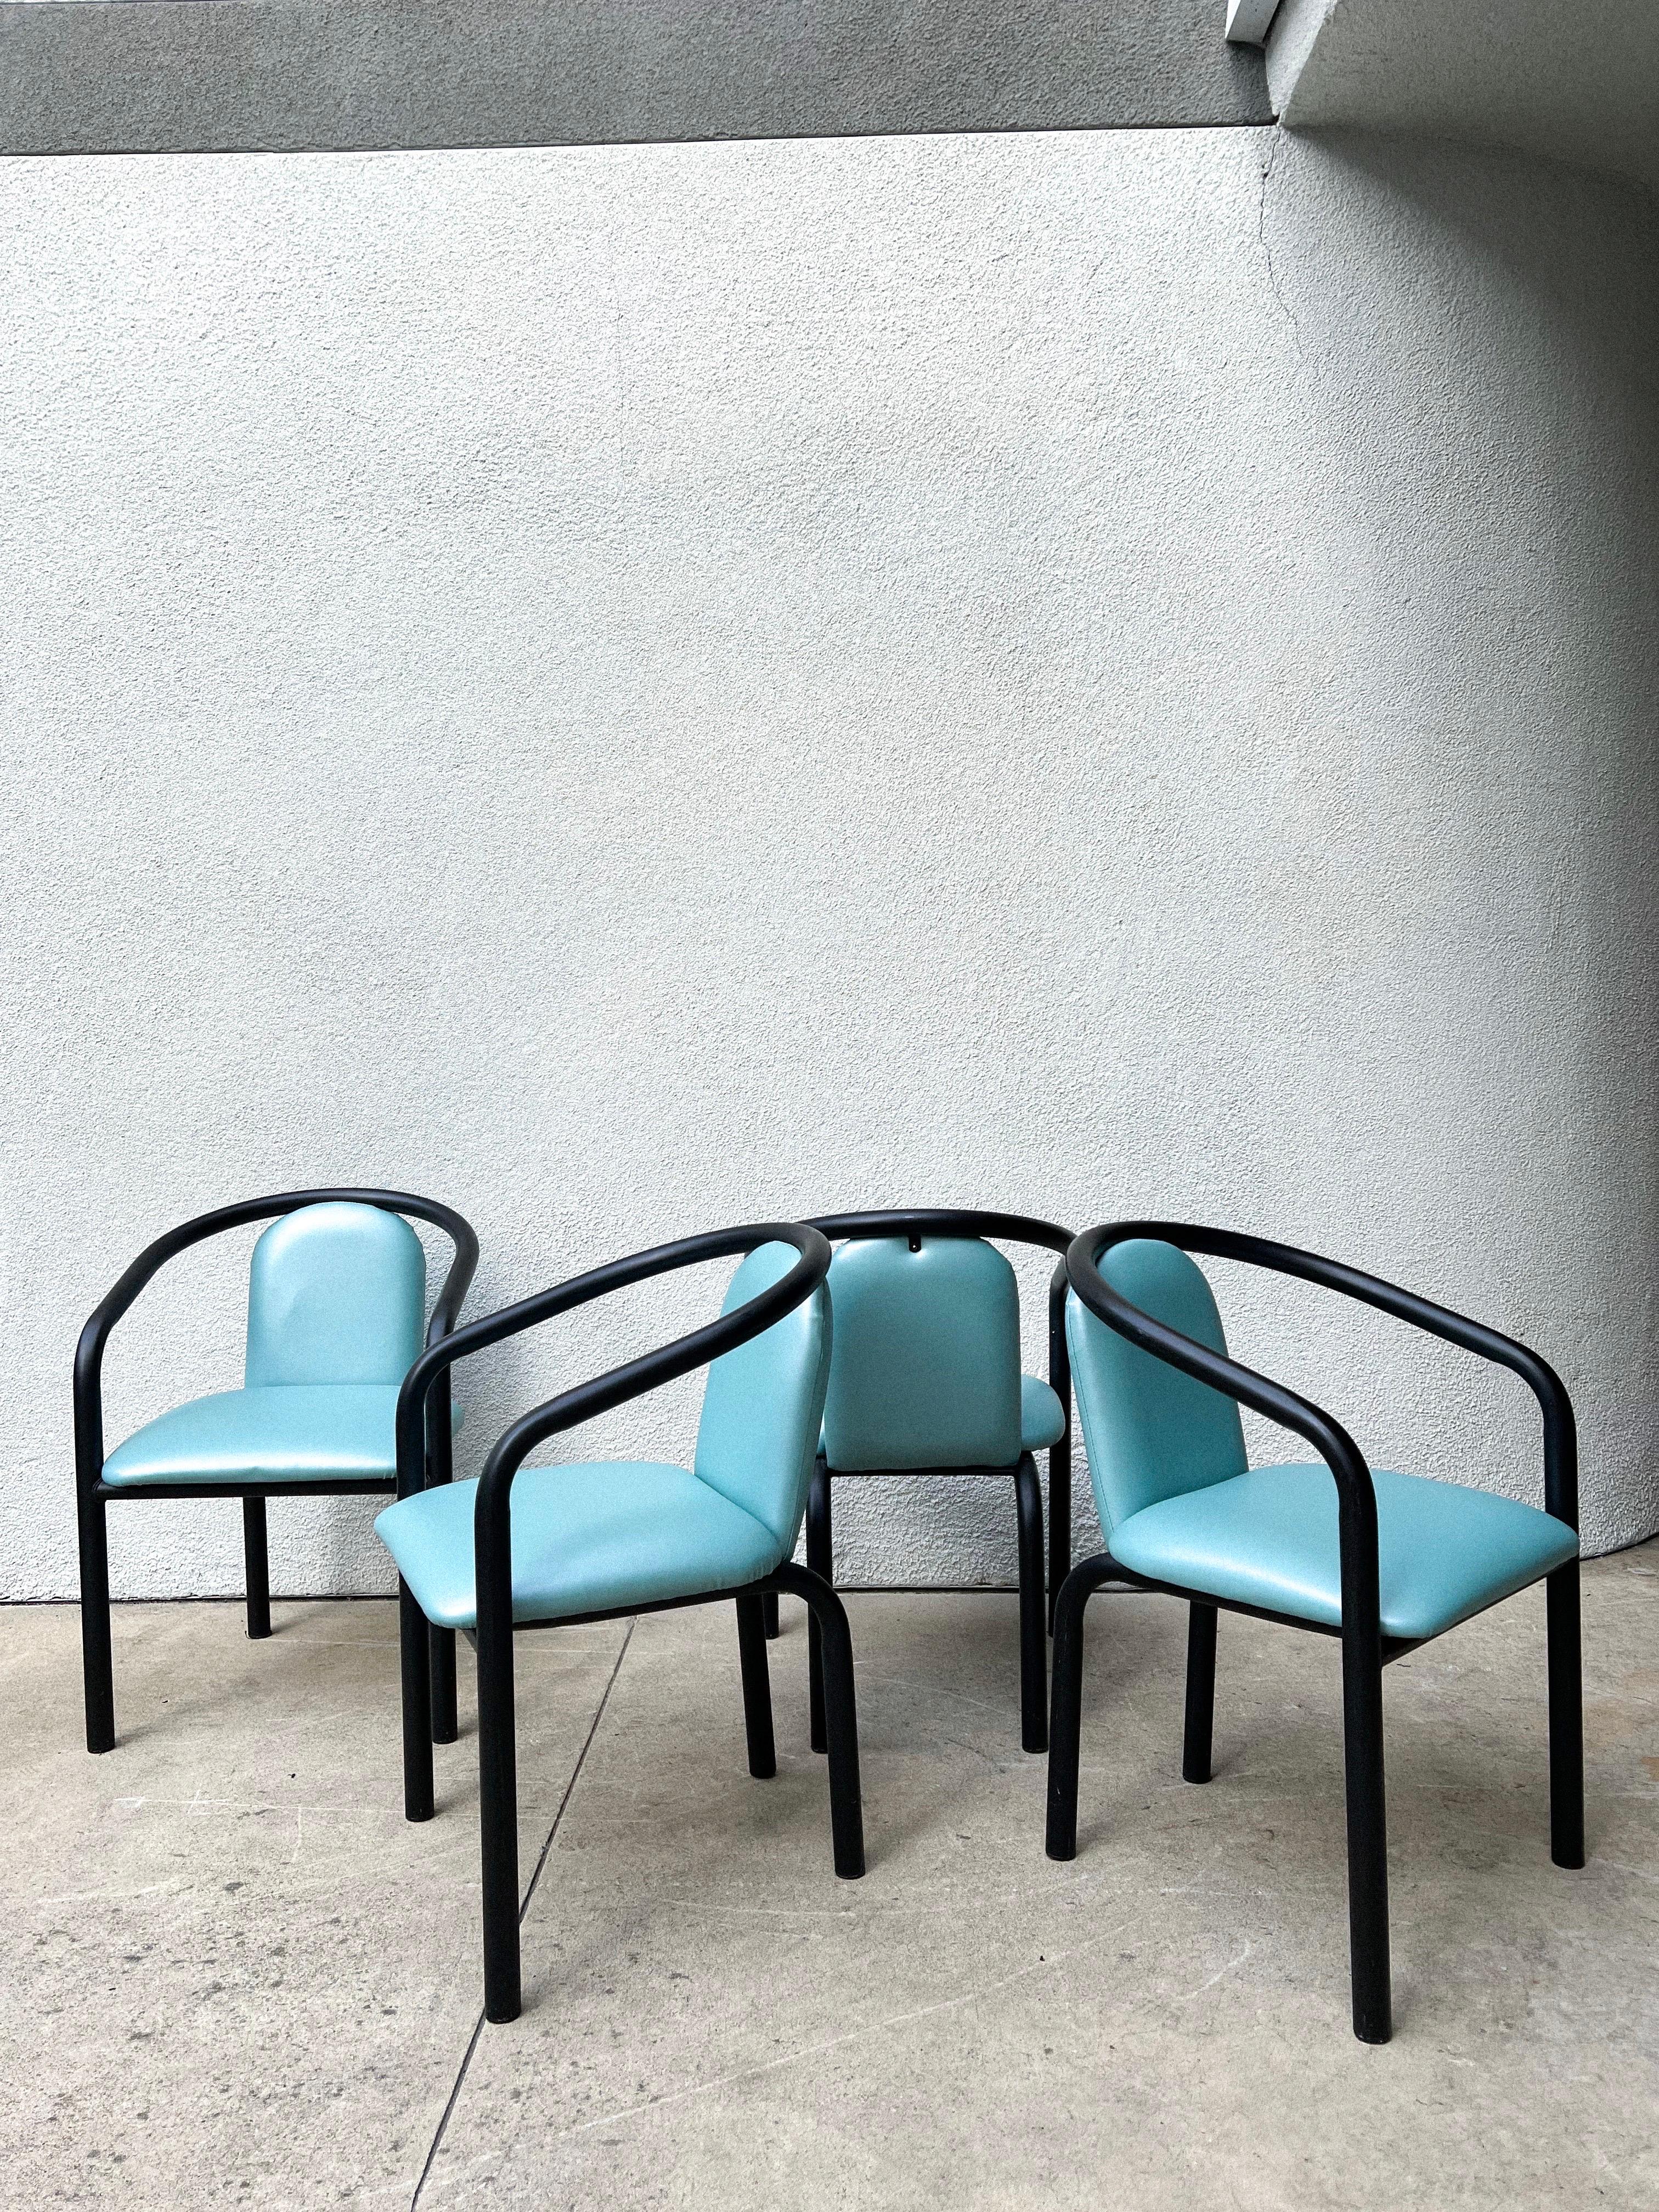 Set of 4 postmodern chairs featuring black chunky/tubular metal frames and flawless upholstery in an aqua hue vinyl.